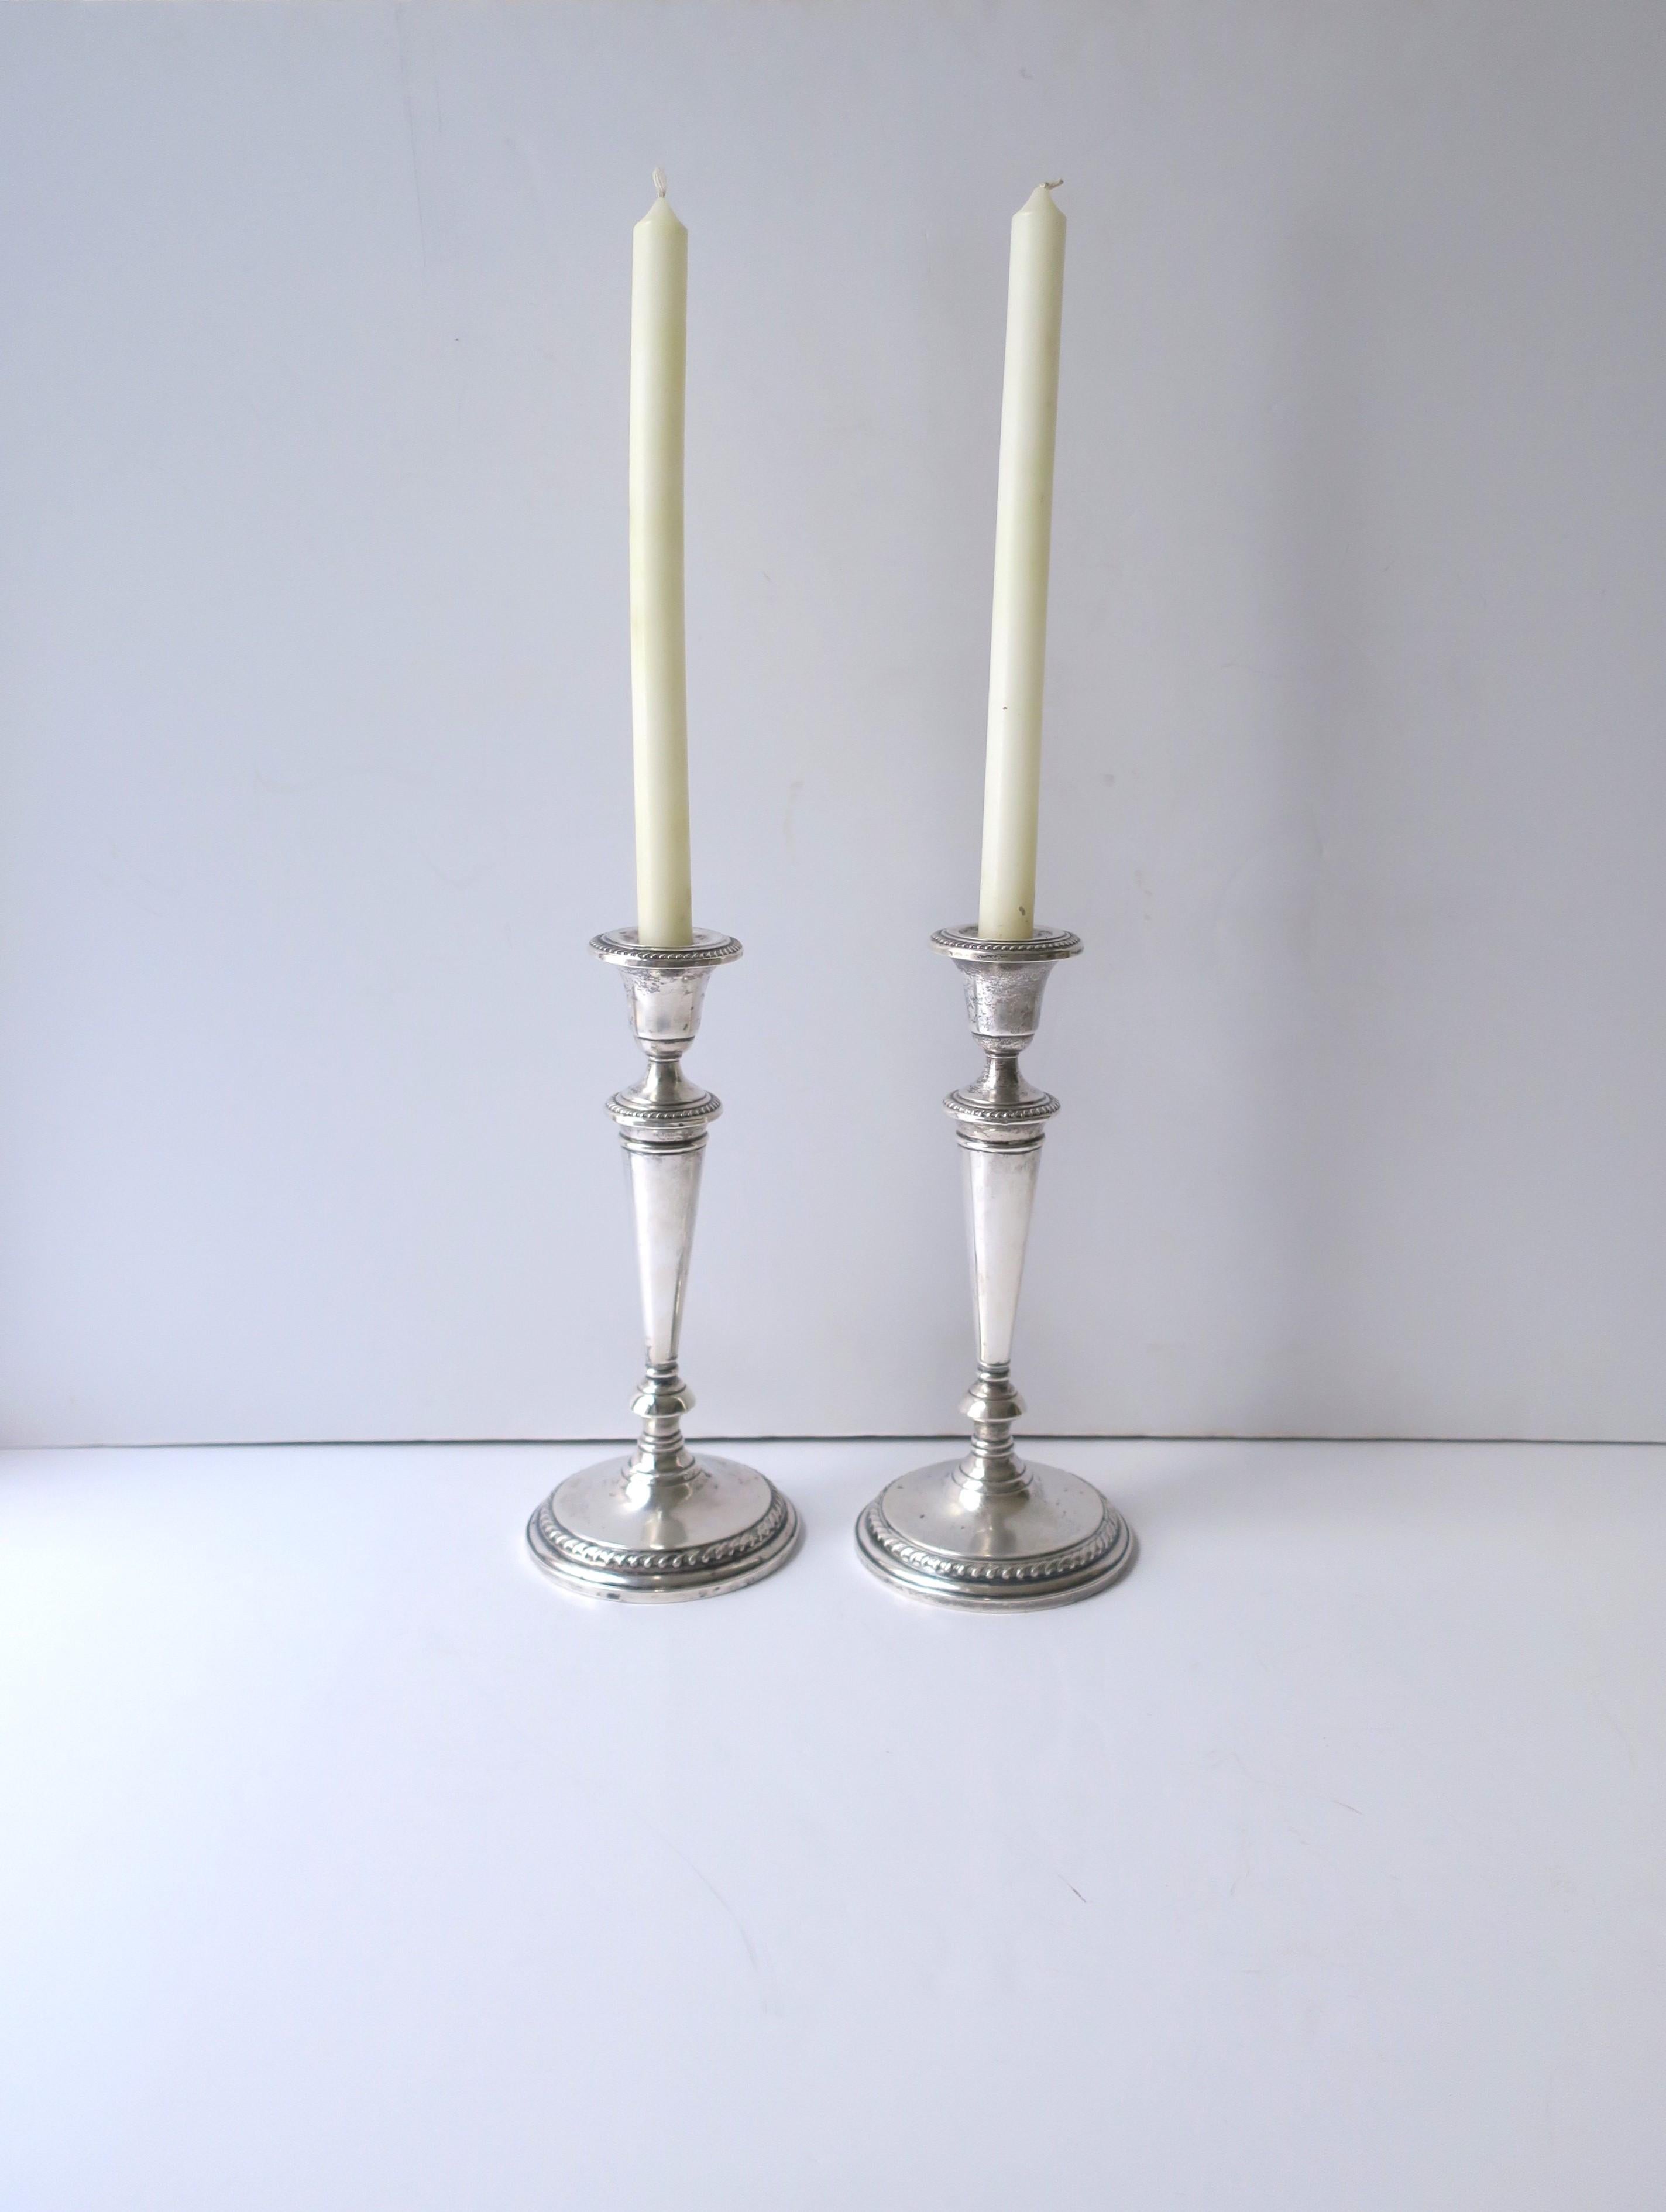 An English pair (2) of sterling silver candlestick holders, circa early to mid-20th century, England. A beautiful set with decorated candle cup supported by a conical shaft on a circular decorative edge base. With marks' mark and sterling mark on